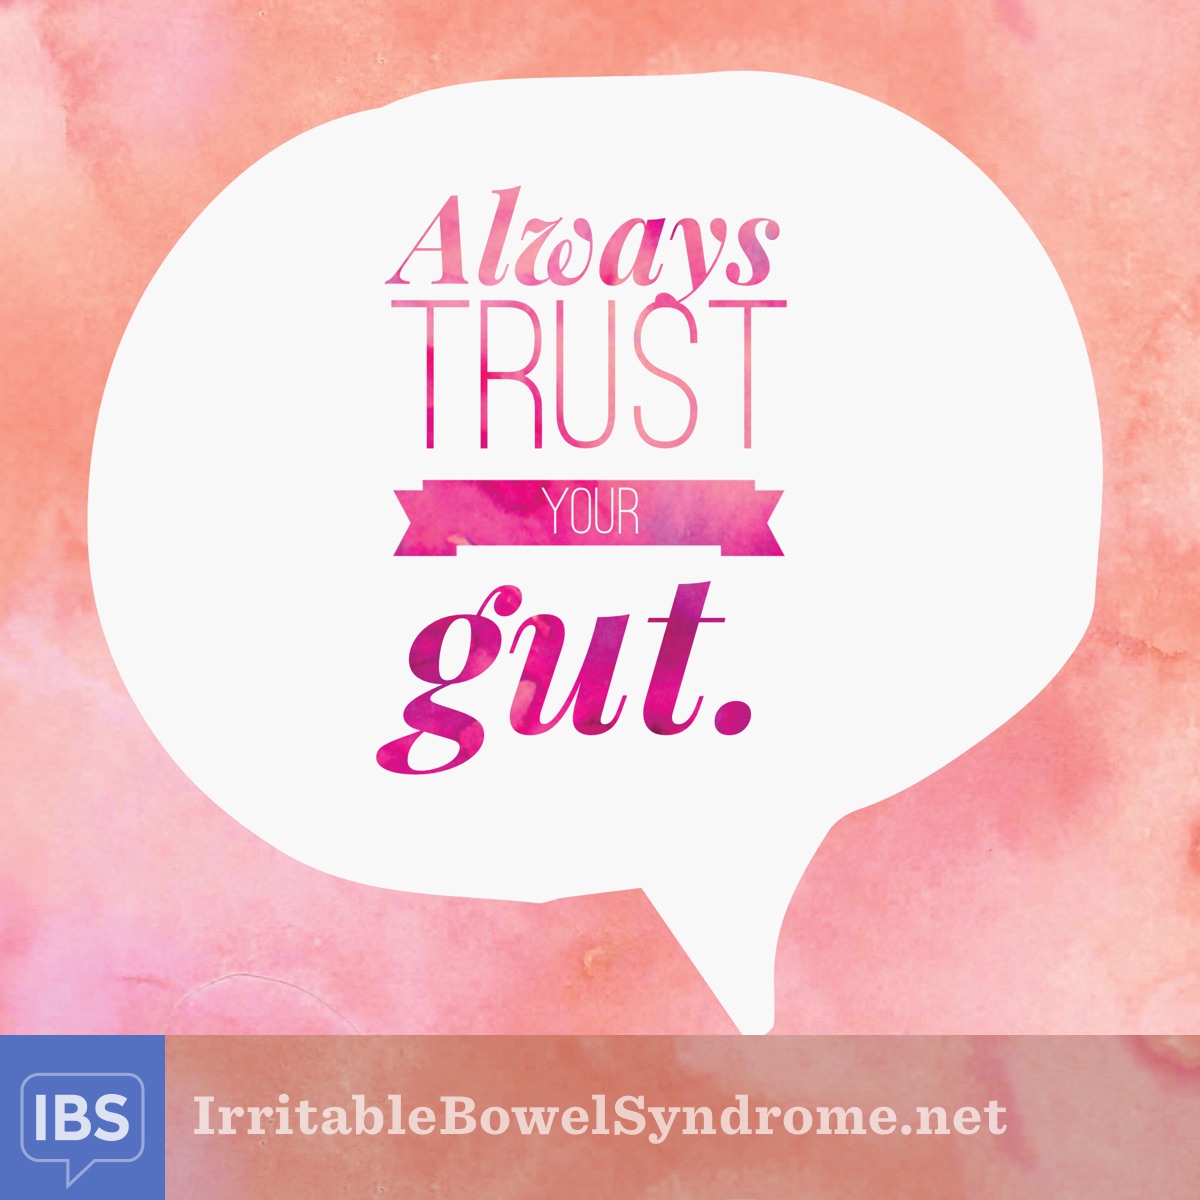 IBS Was My First Diagnosis